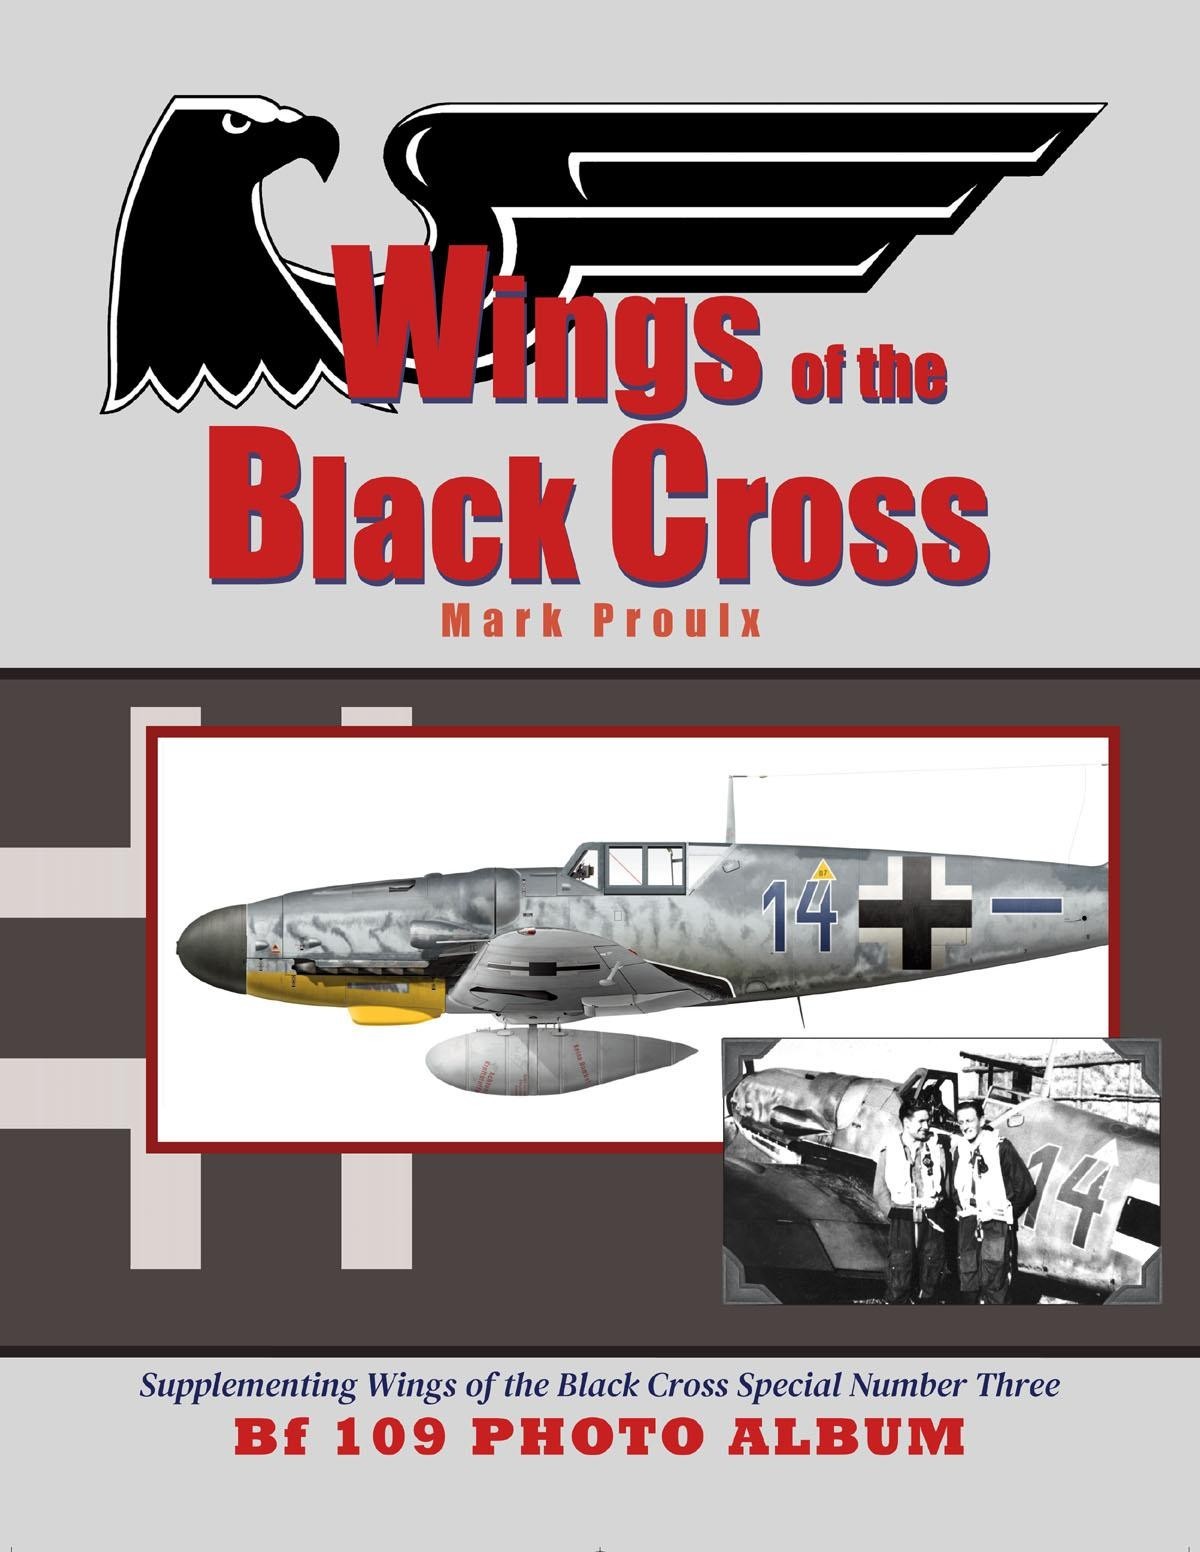 Coming soon ~ supplementing the Special #3 on the Bf 109 is a photo album of Rare Bf 109 images!